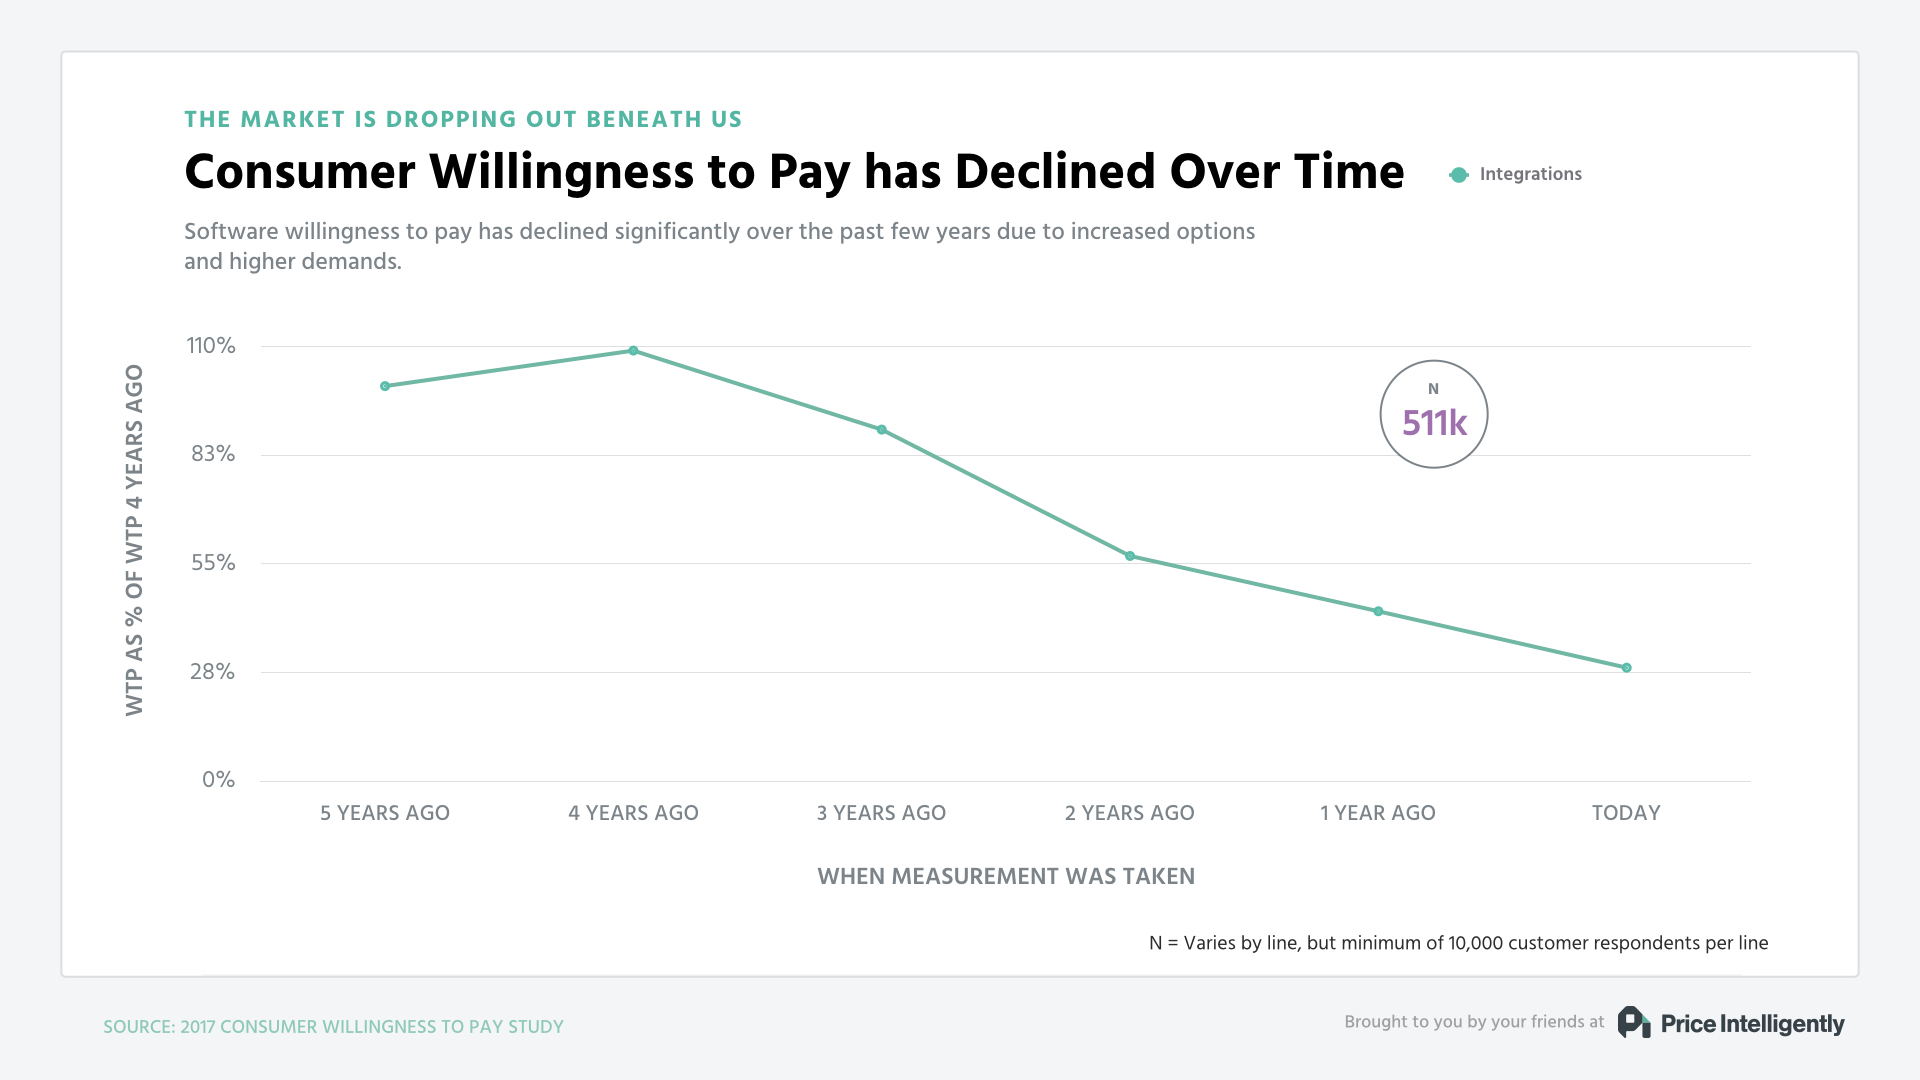 Consumer Willingness to Pay has declined over time